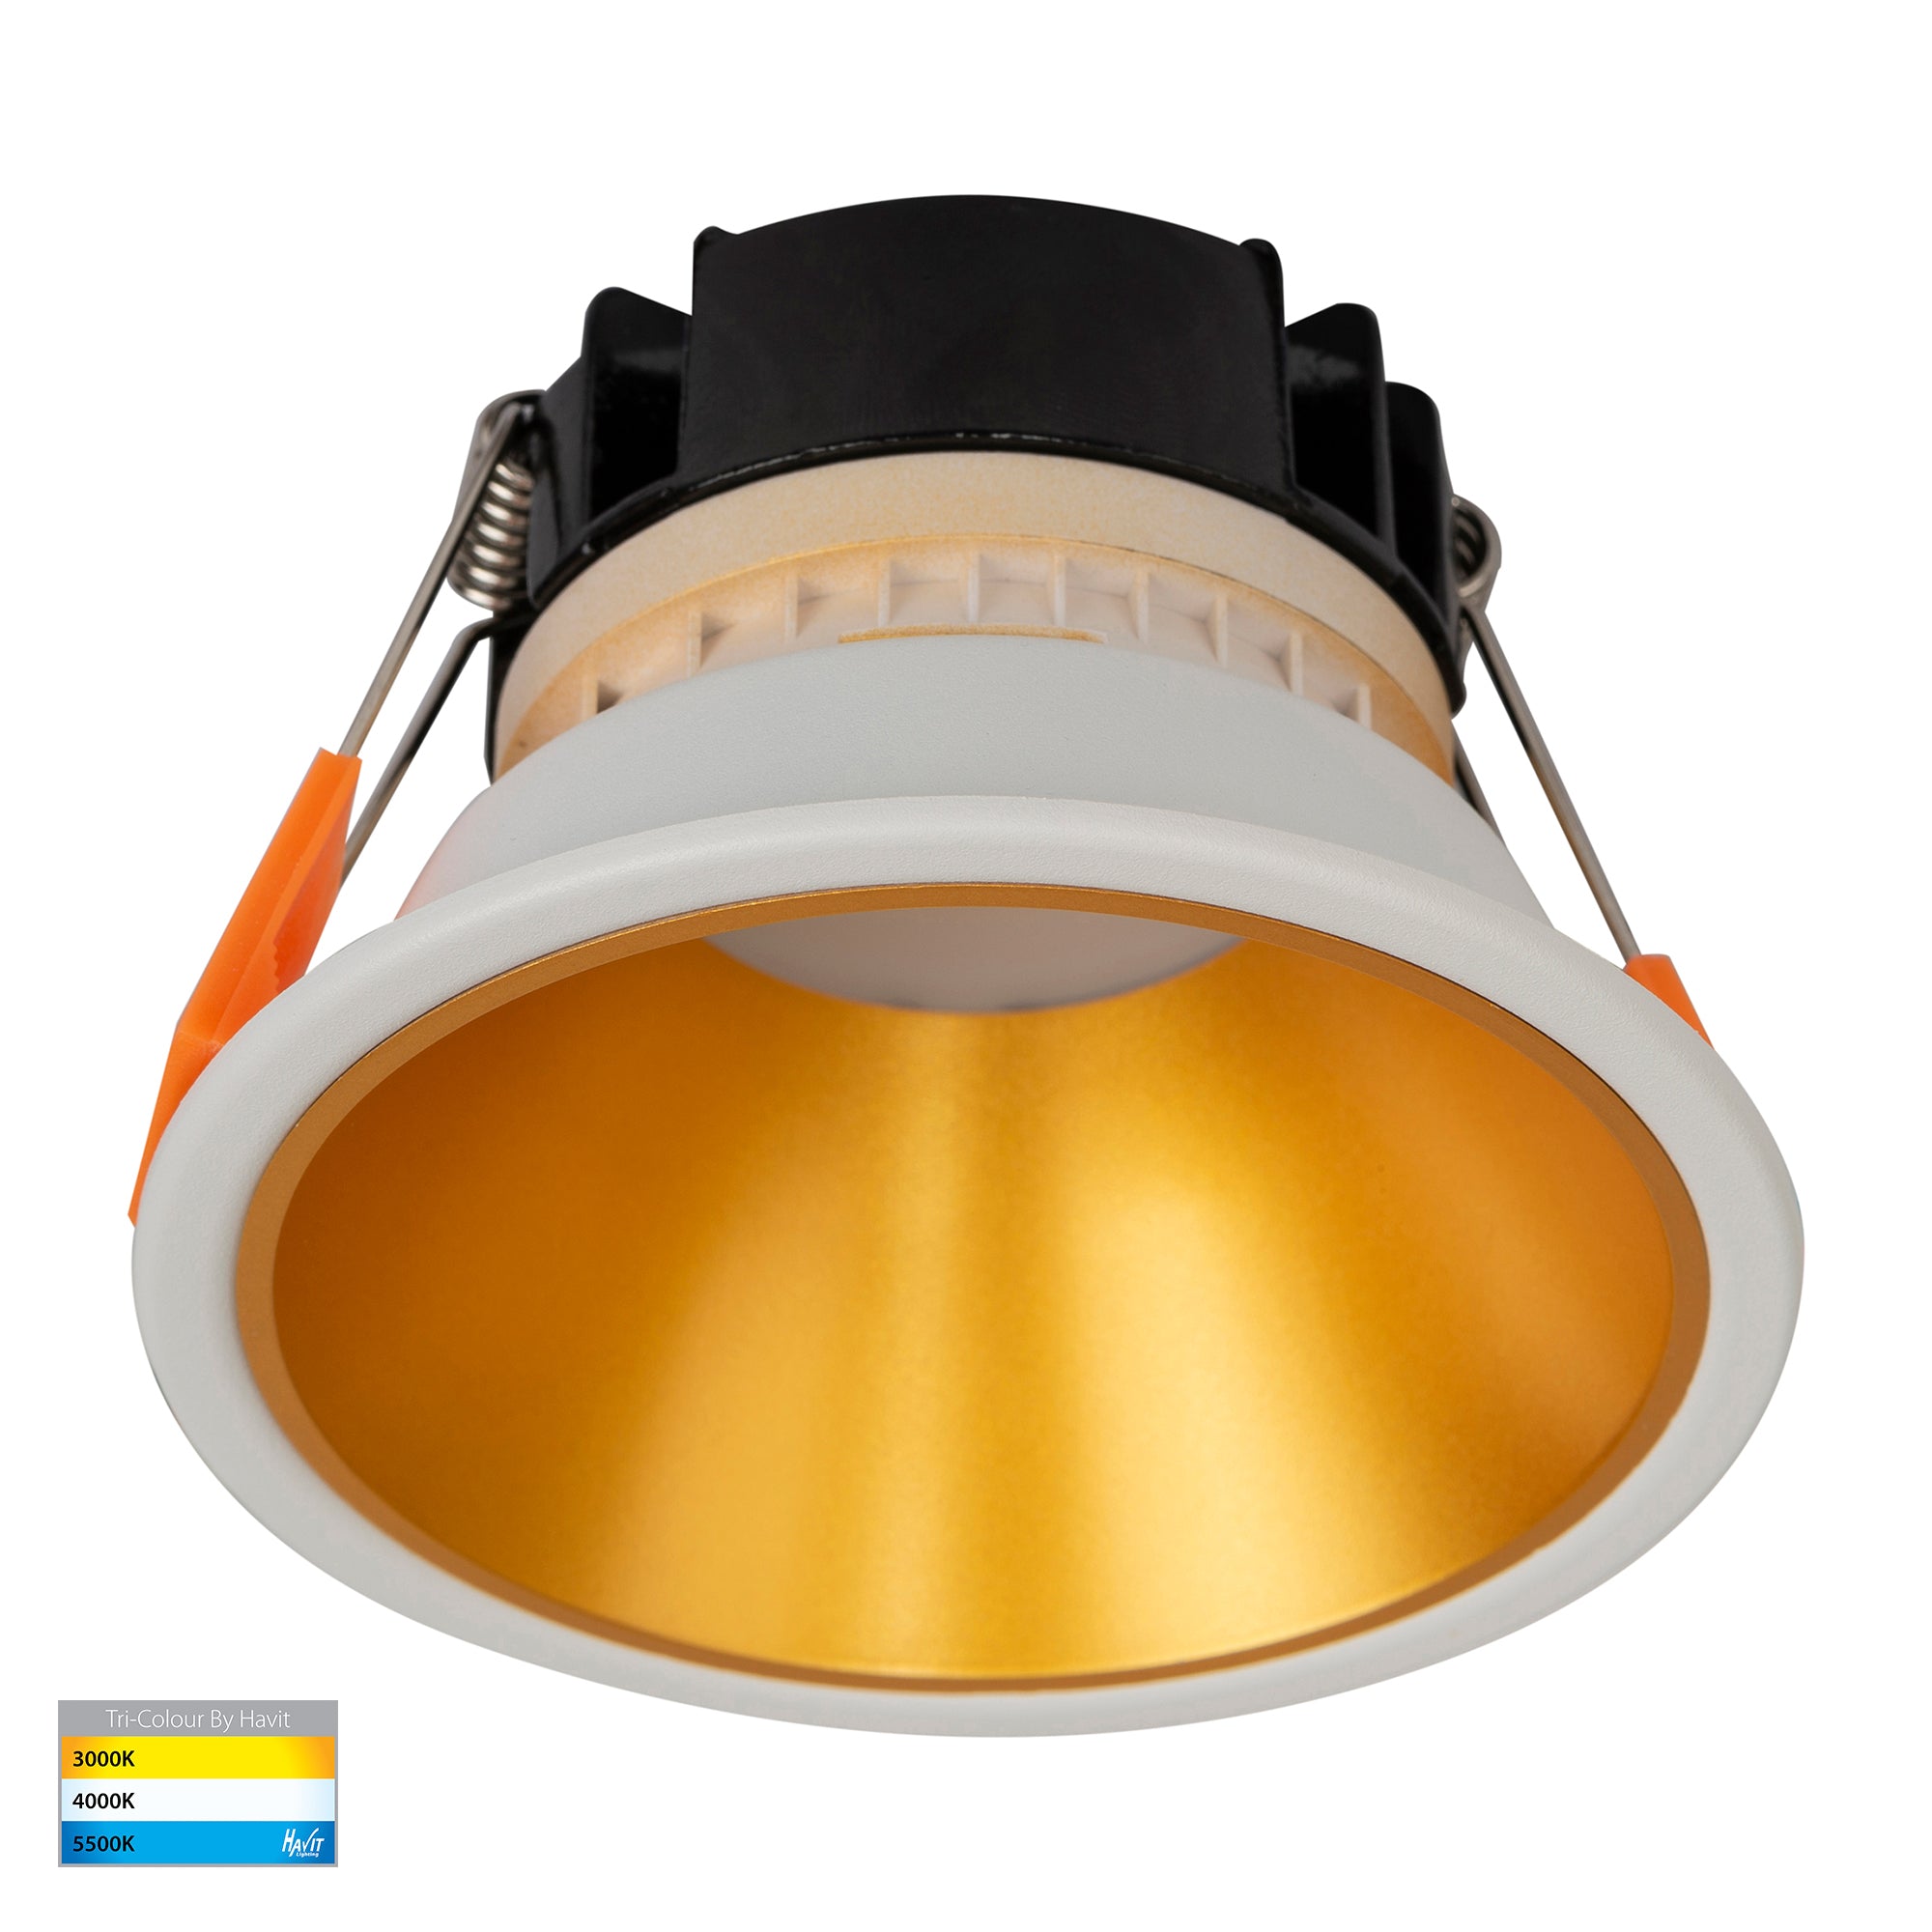 HV5528T-WG - Gleam White with Gold Insert Tri Colour Fixed Deep LED Downlight